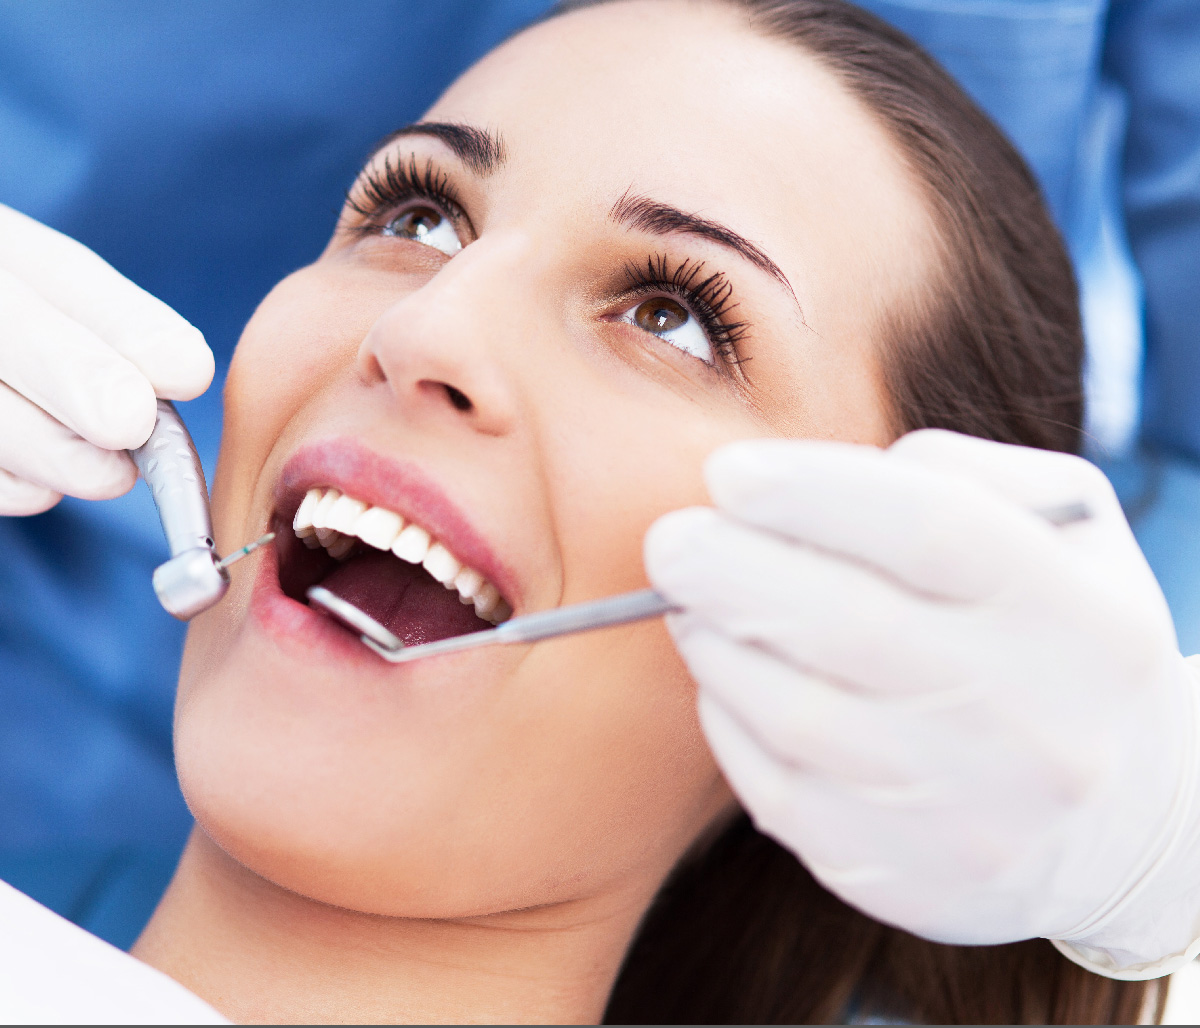 Best Dentist For Getting High Quality Crowns Near Me In, Bloomington